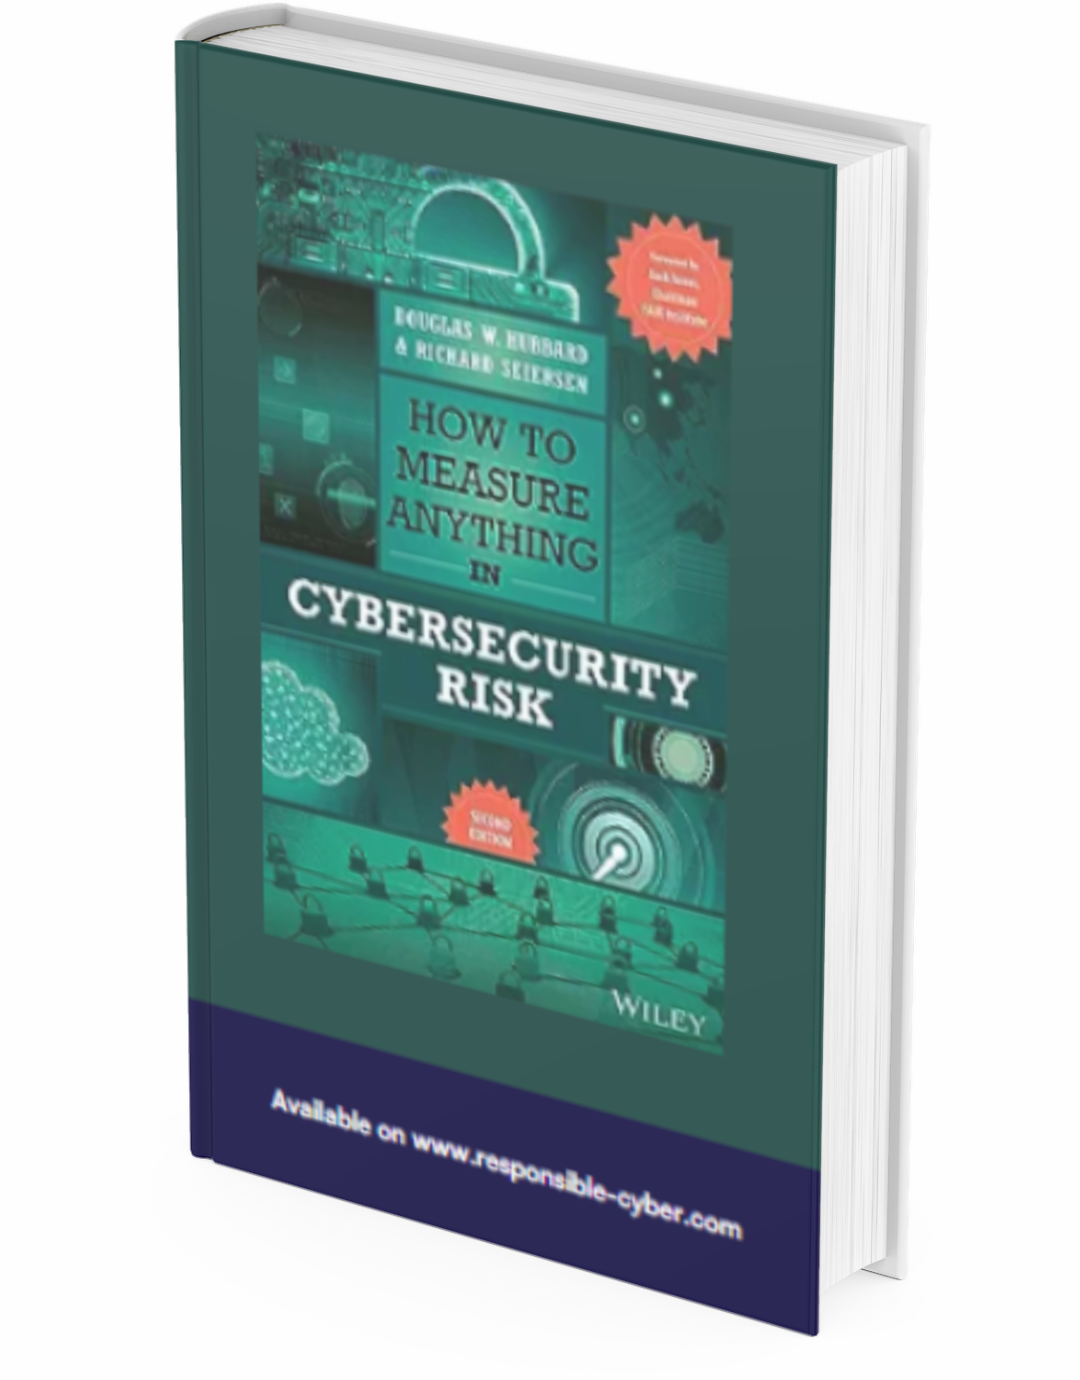 How to Measure Anything in Cybersecurity Risk 1st Edition